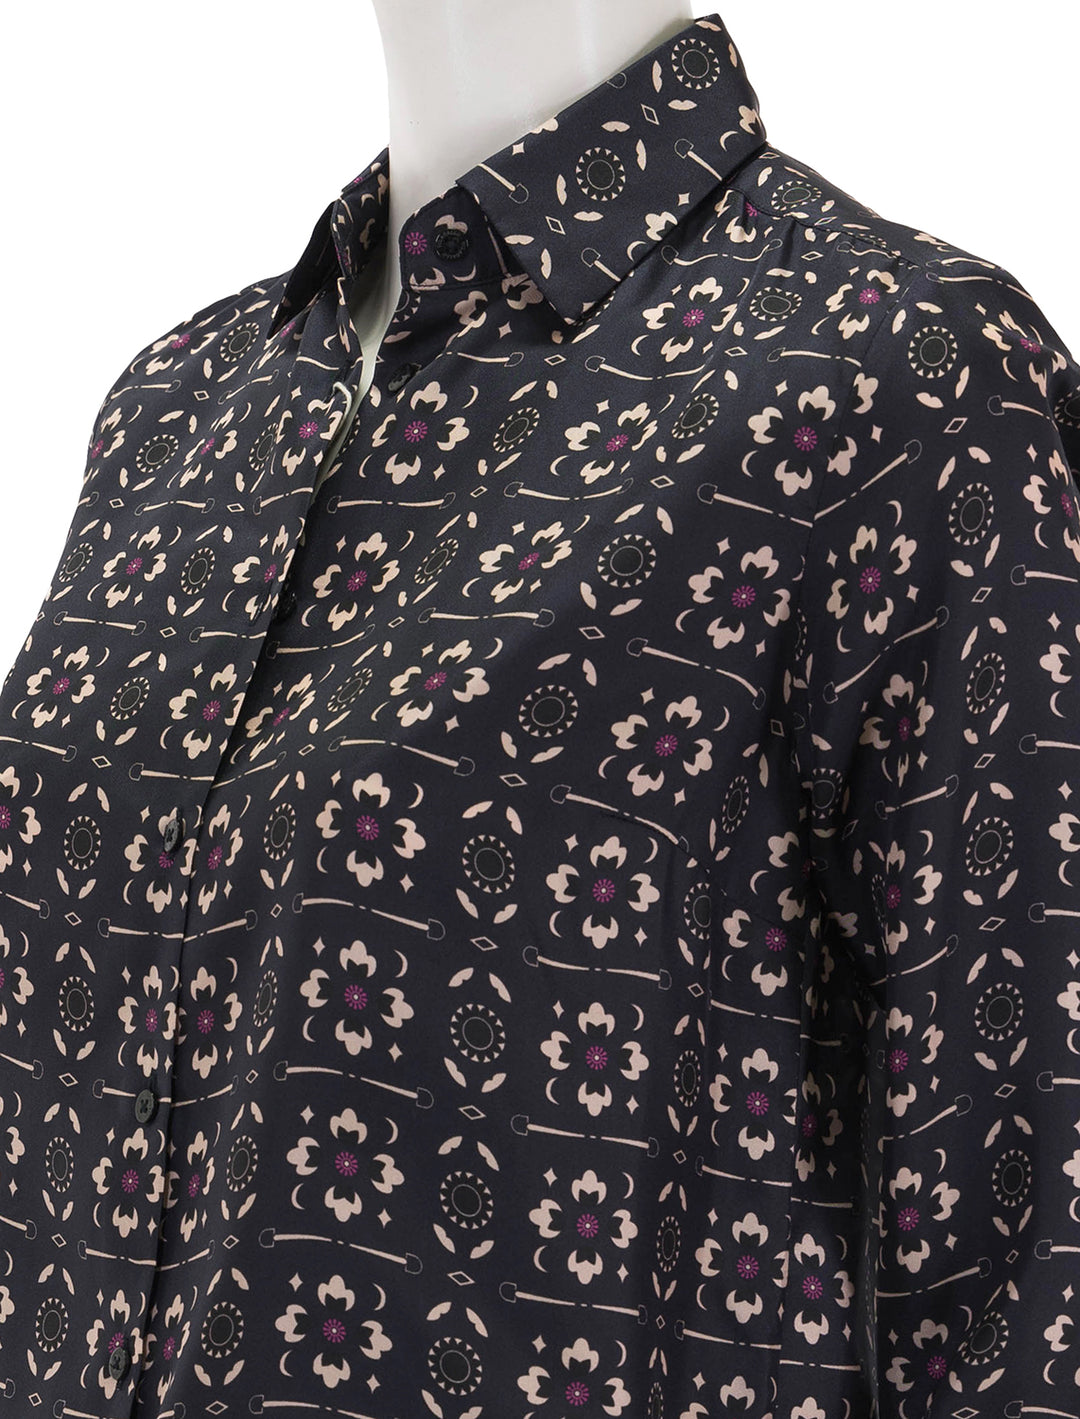 Close-up view of Vilagallo's camisa isabella floral equestrian blue blouse.